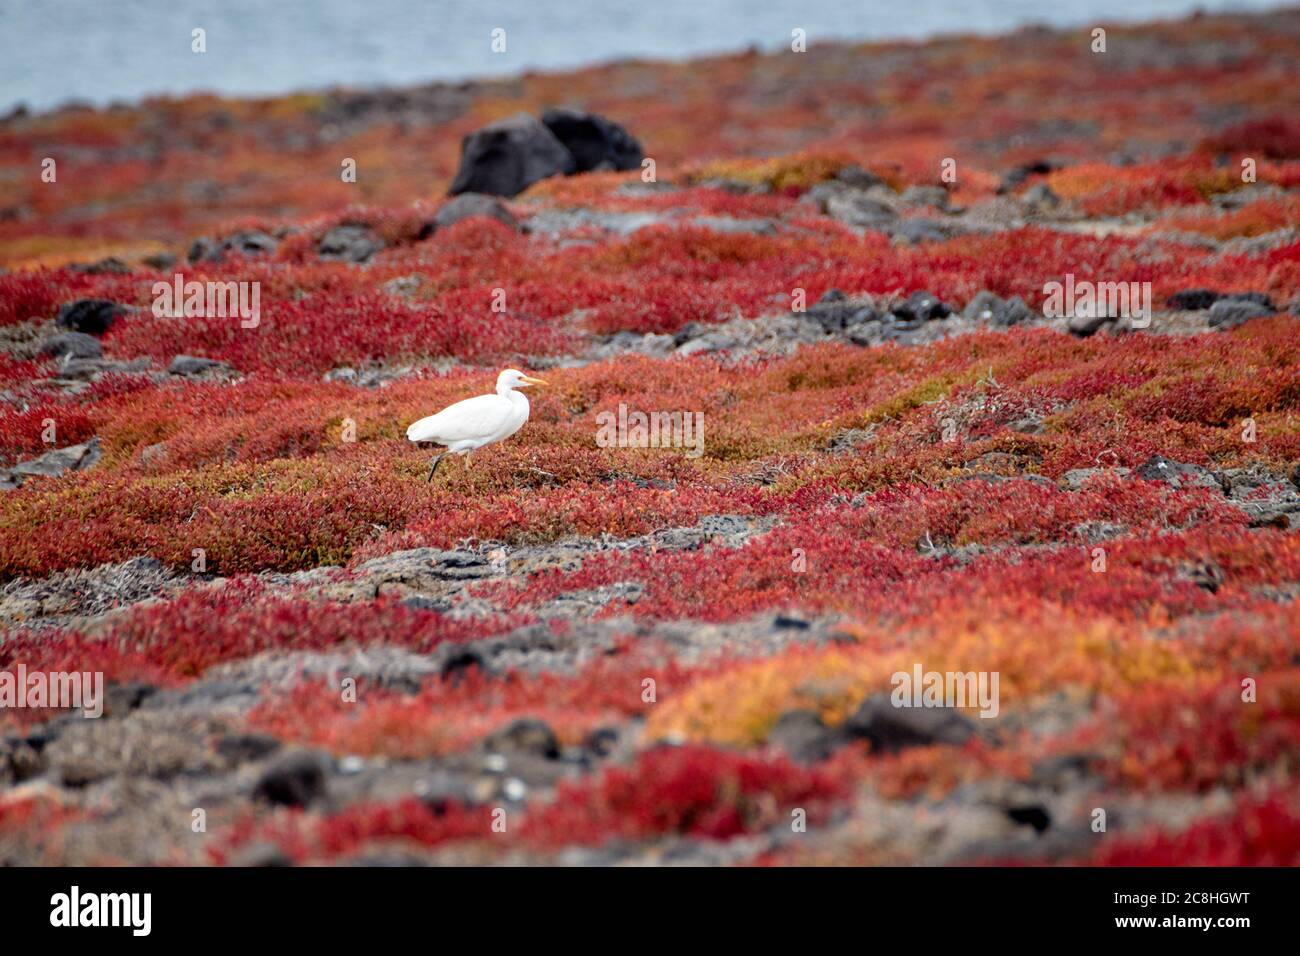 White bird into red grass walking around Plaza Sur Island in a cloudy day. This photo has been shot during a visit to Galapagos (Ecuador) Stock Photo